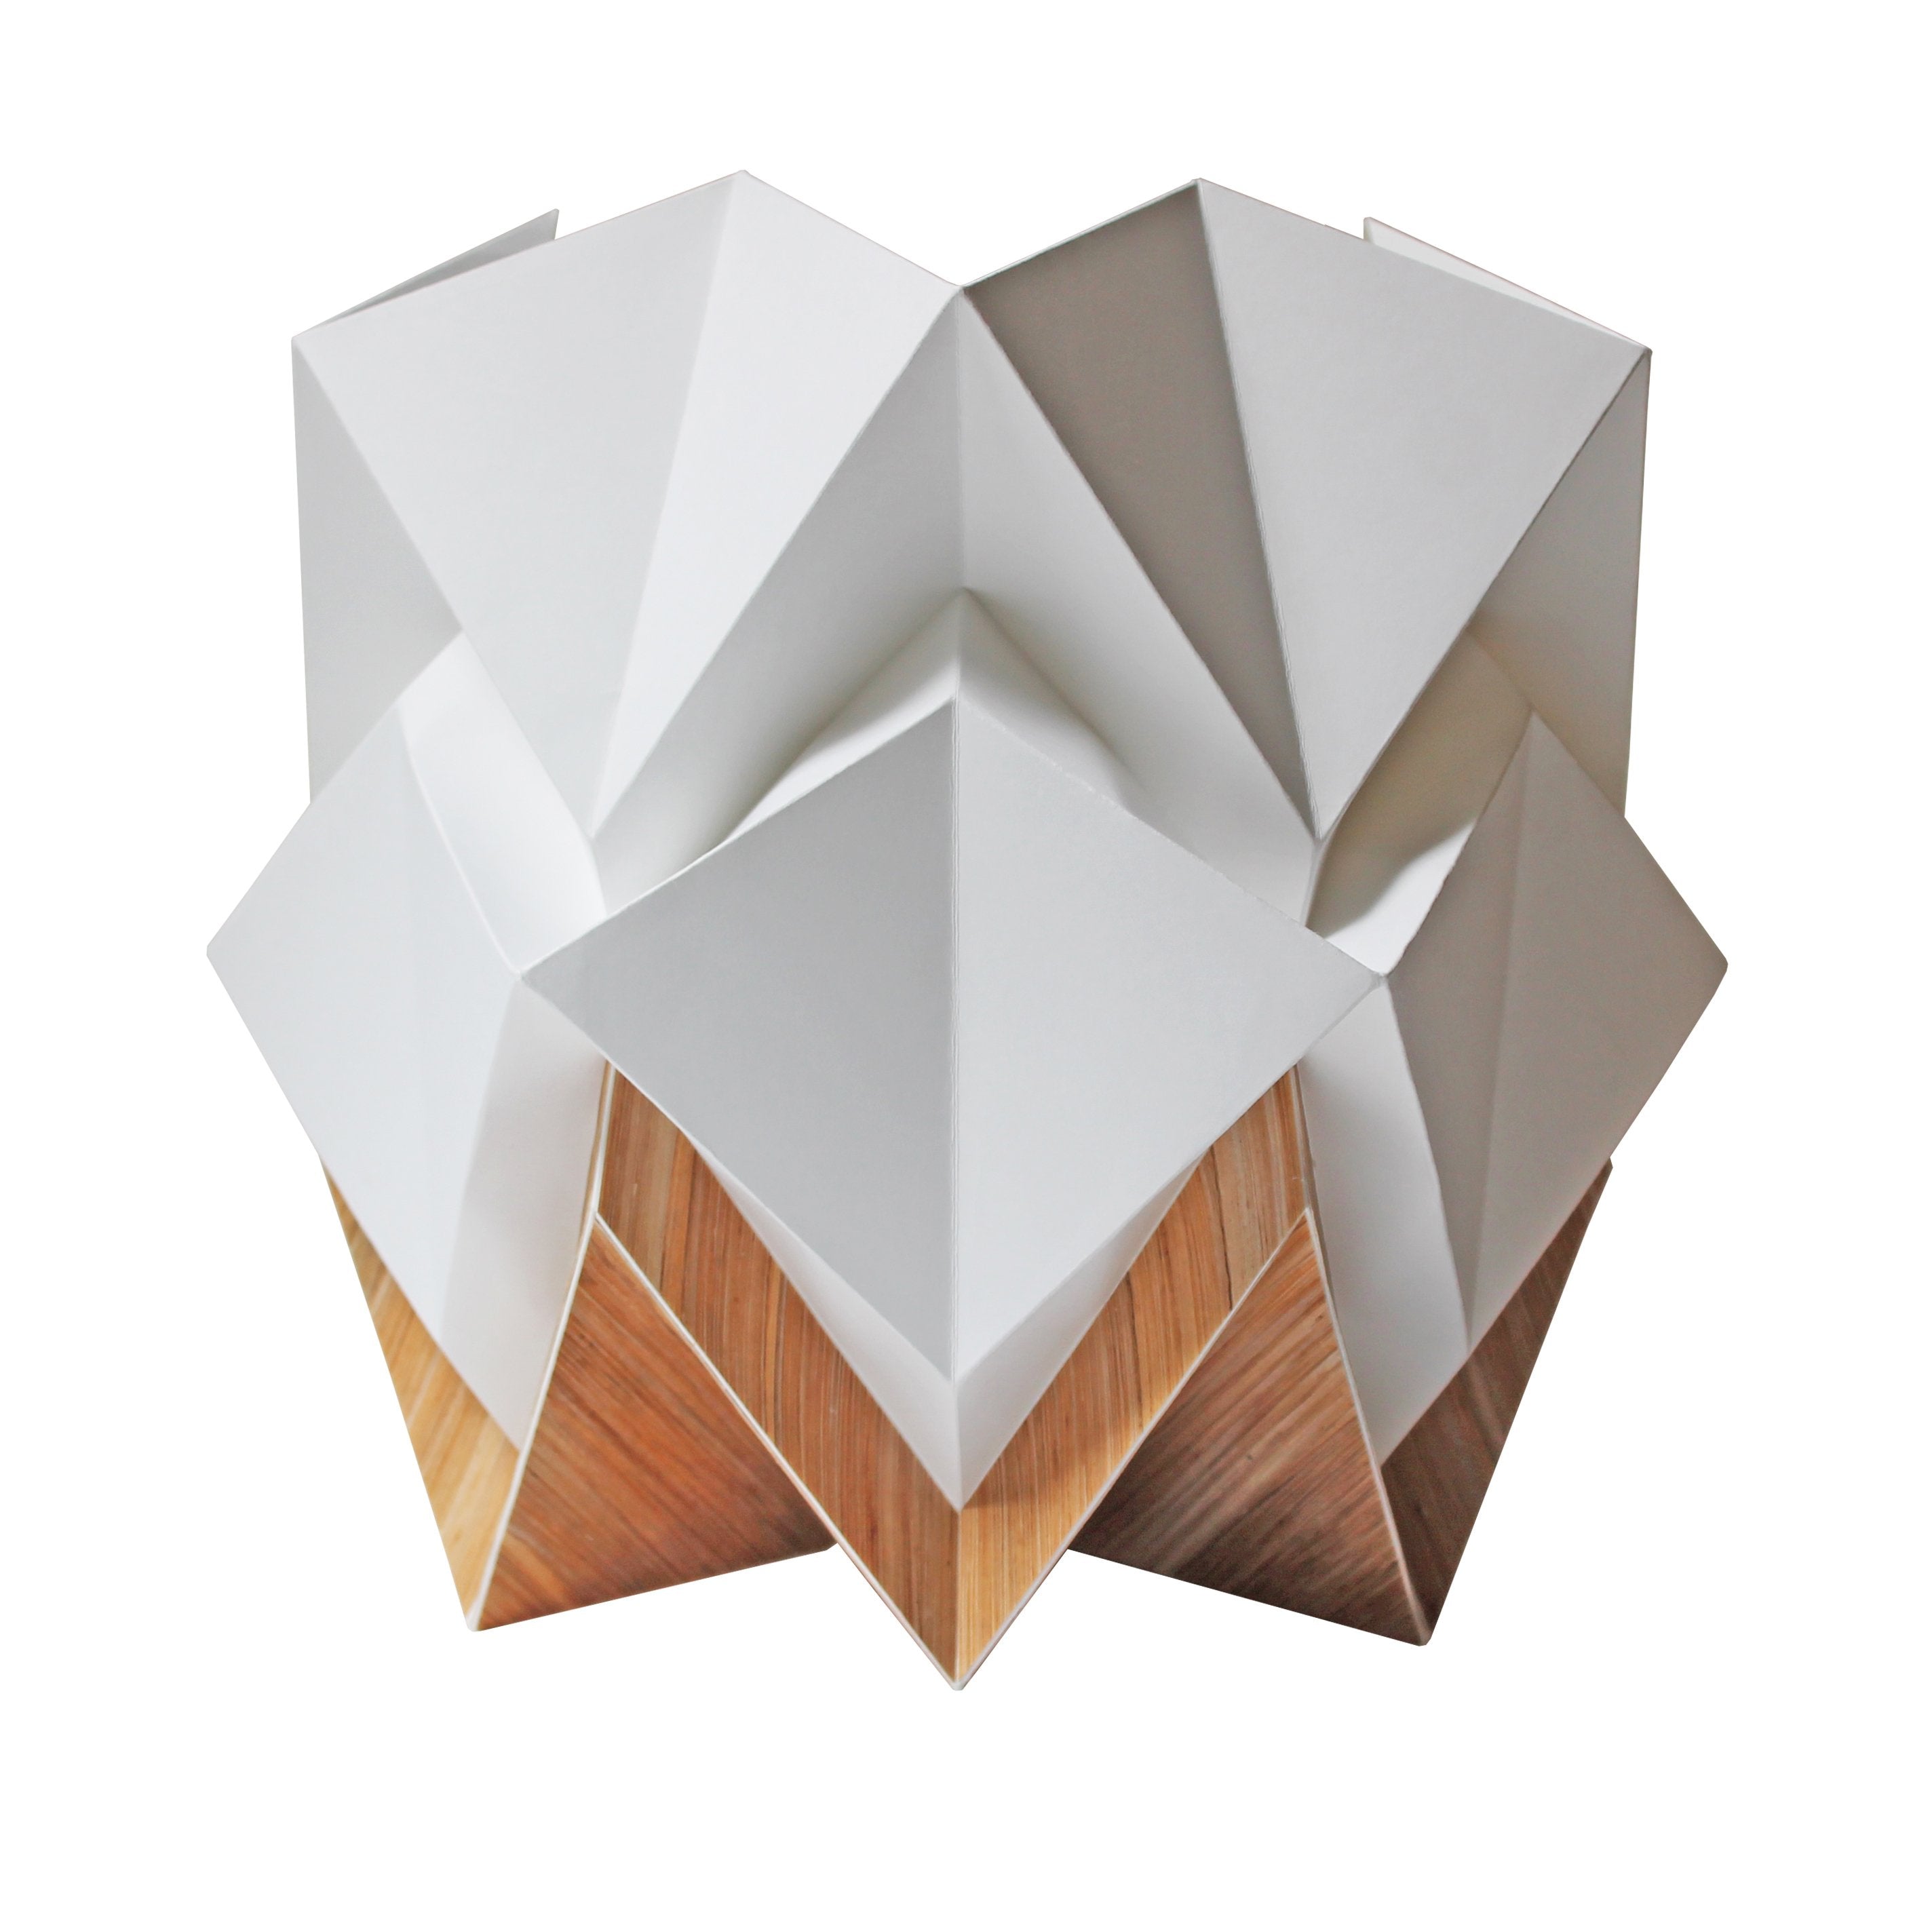 Lampe de table origami ecowood taille s